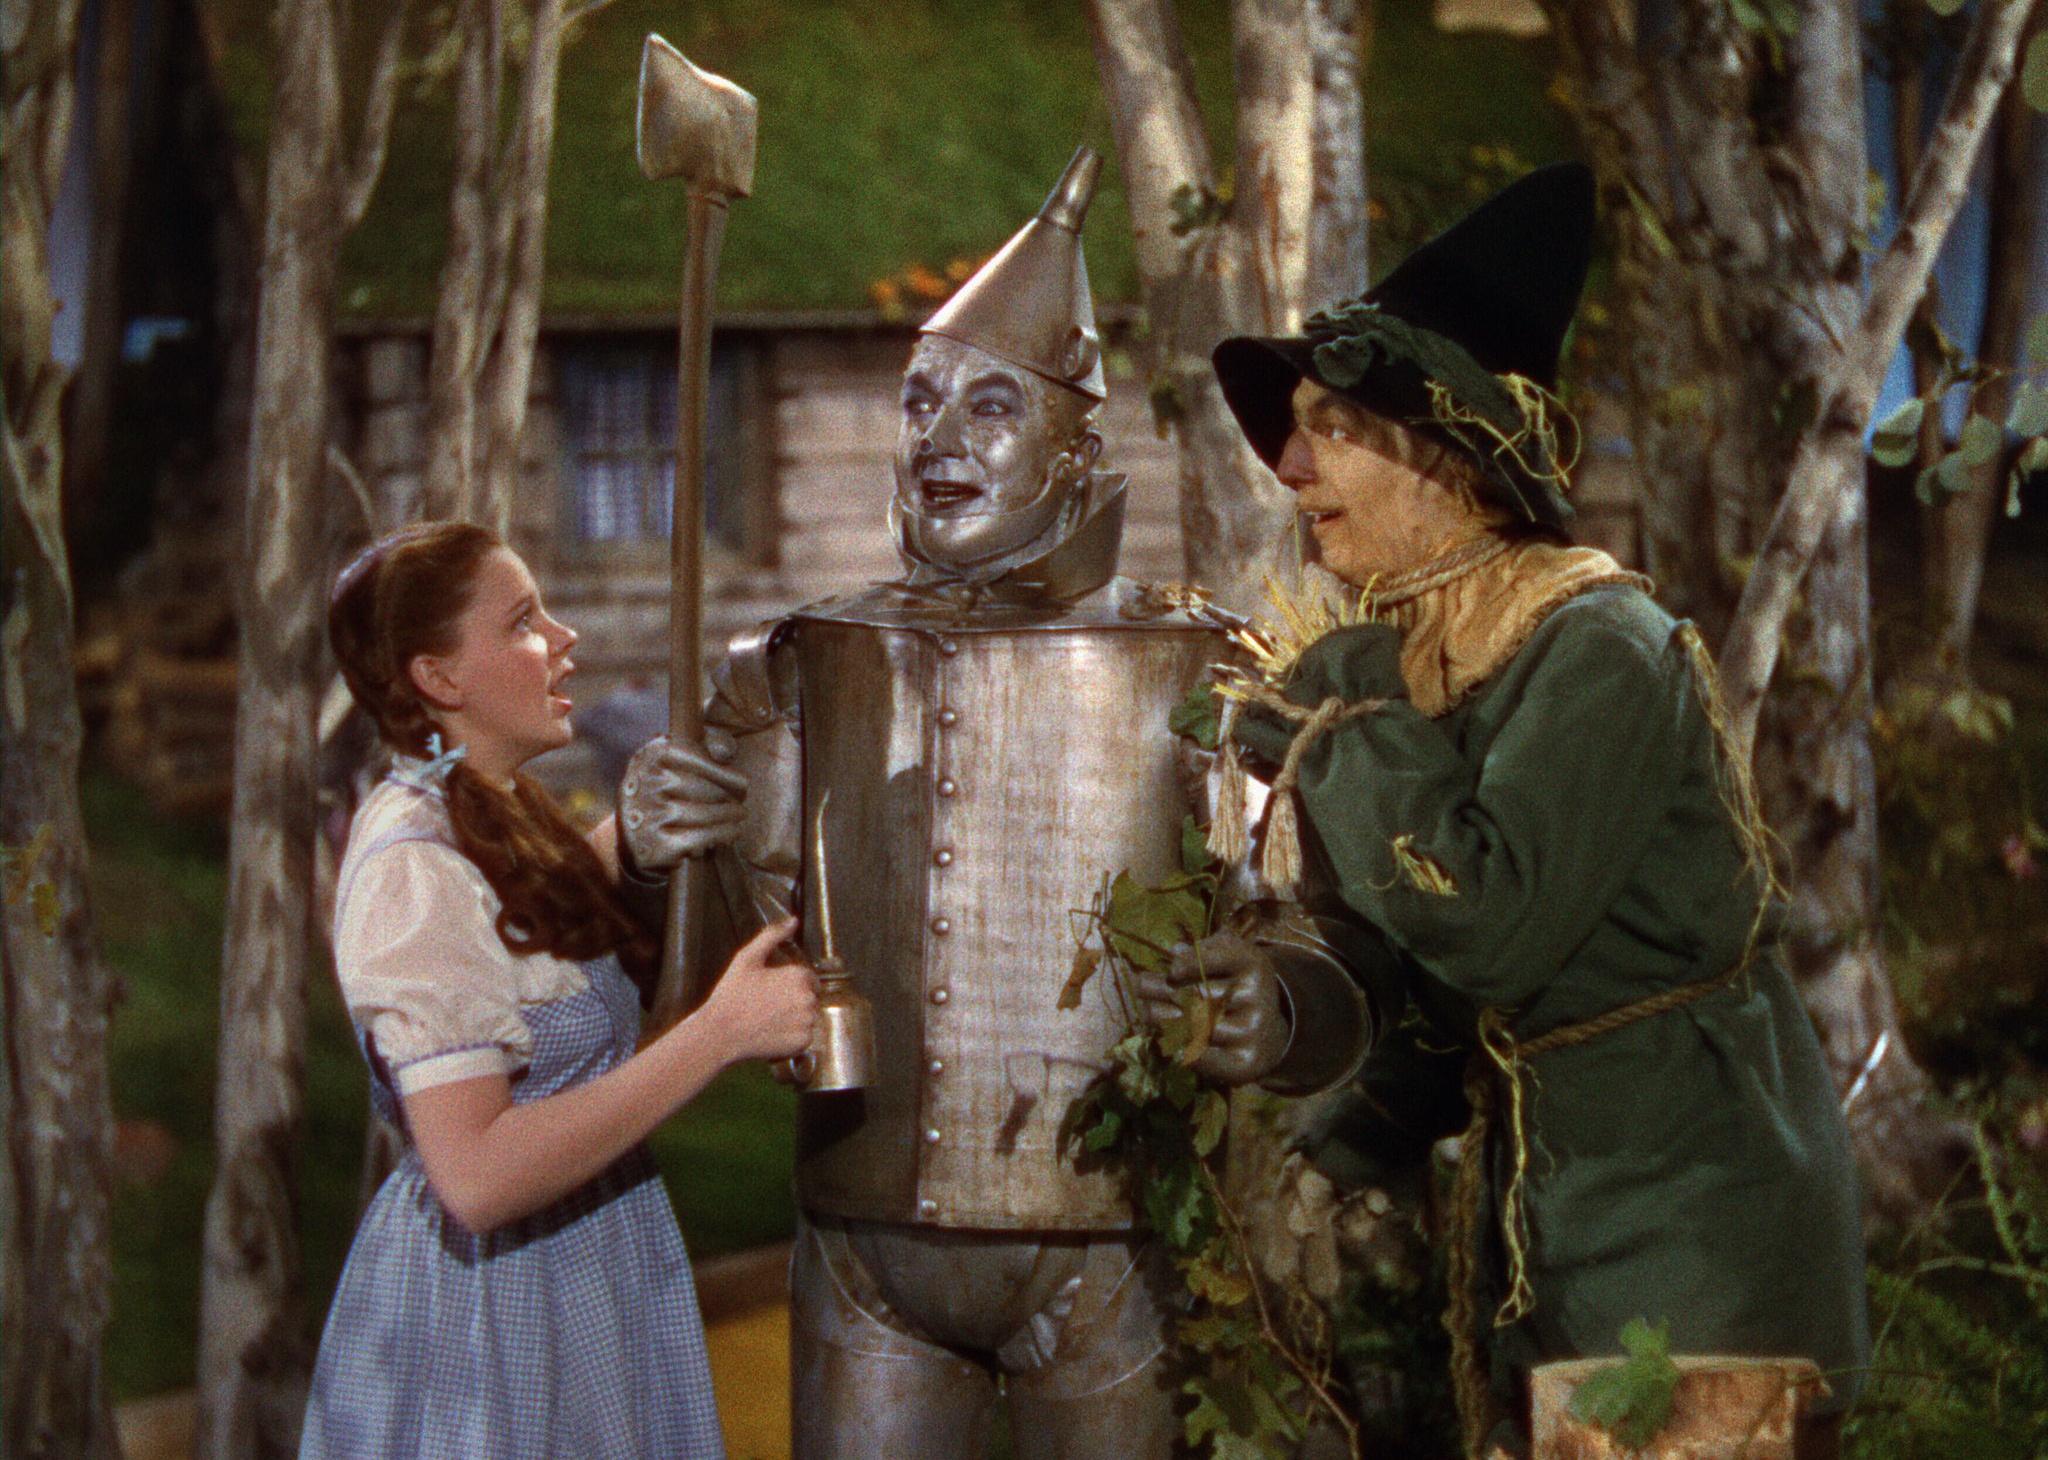 Judy Garland talking to a scarecrow and a tinman.